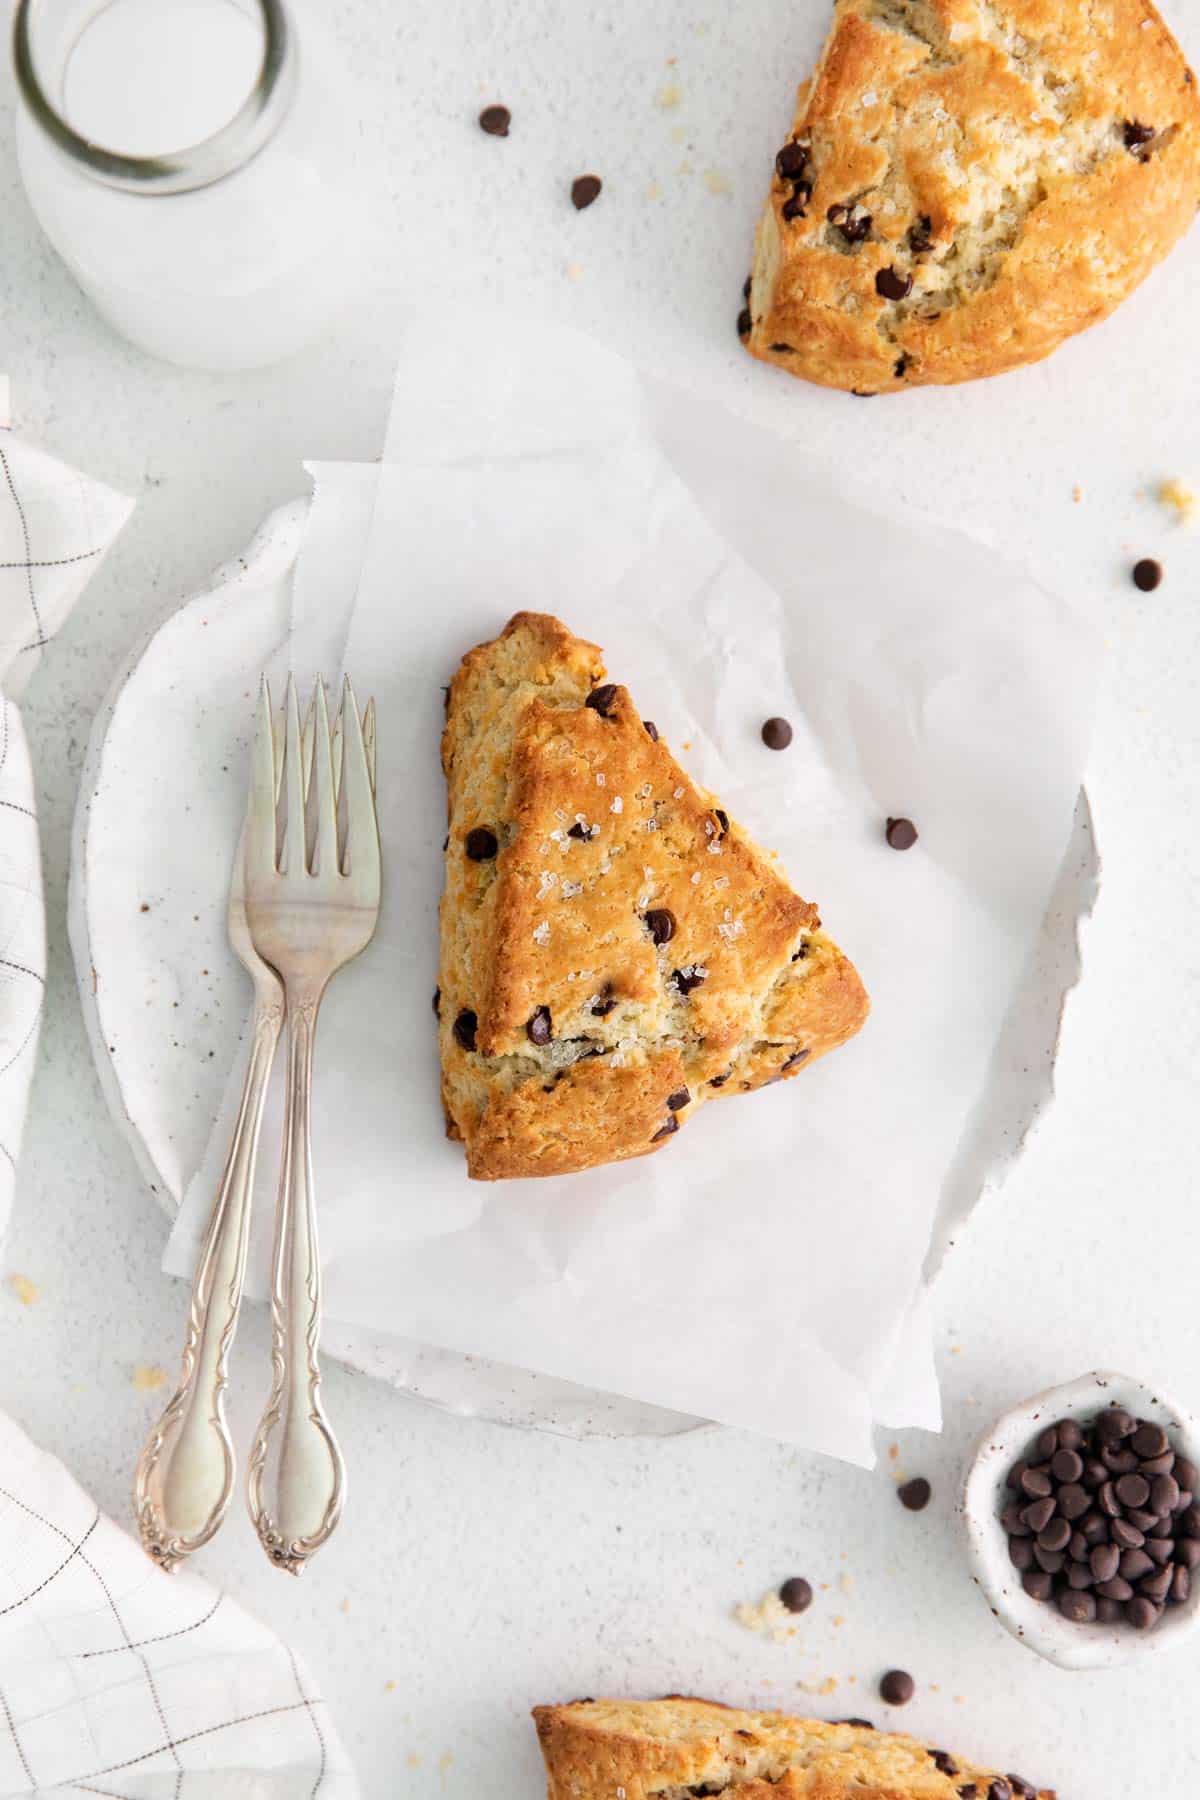 A chocolate chip scone on parchment paper